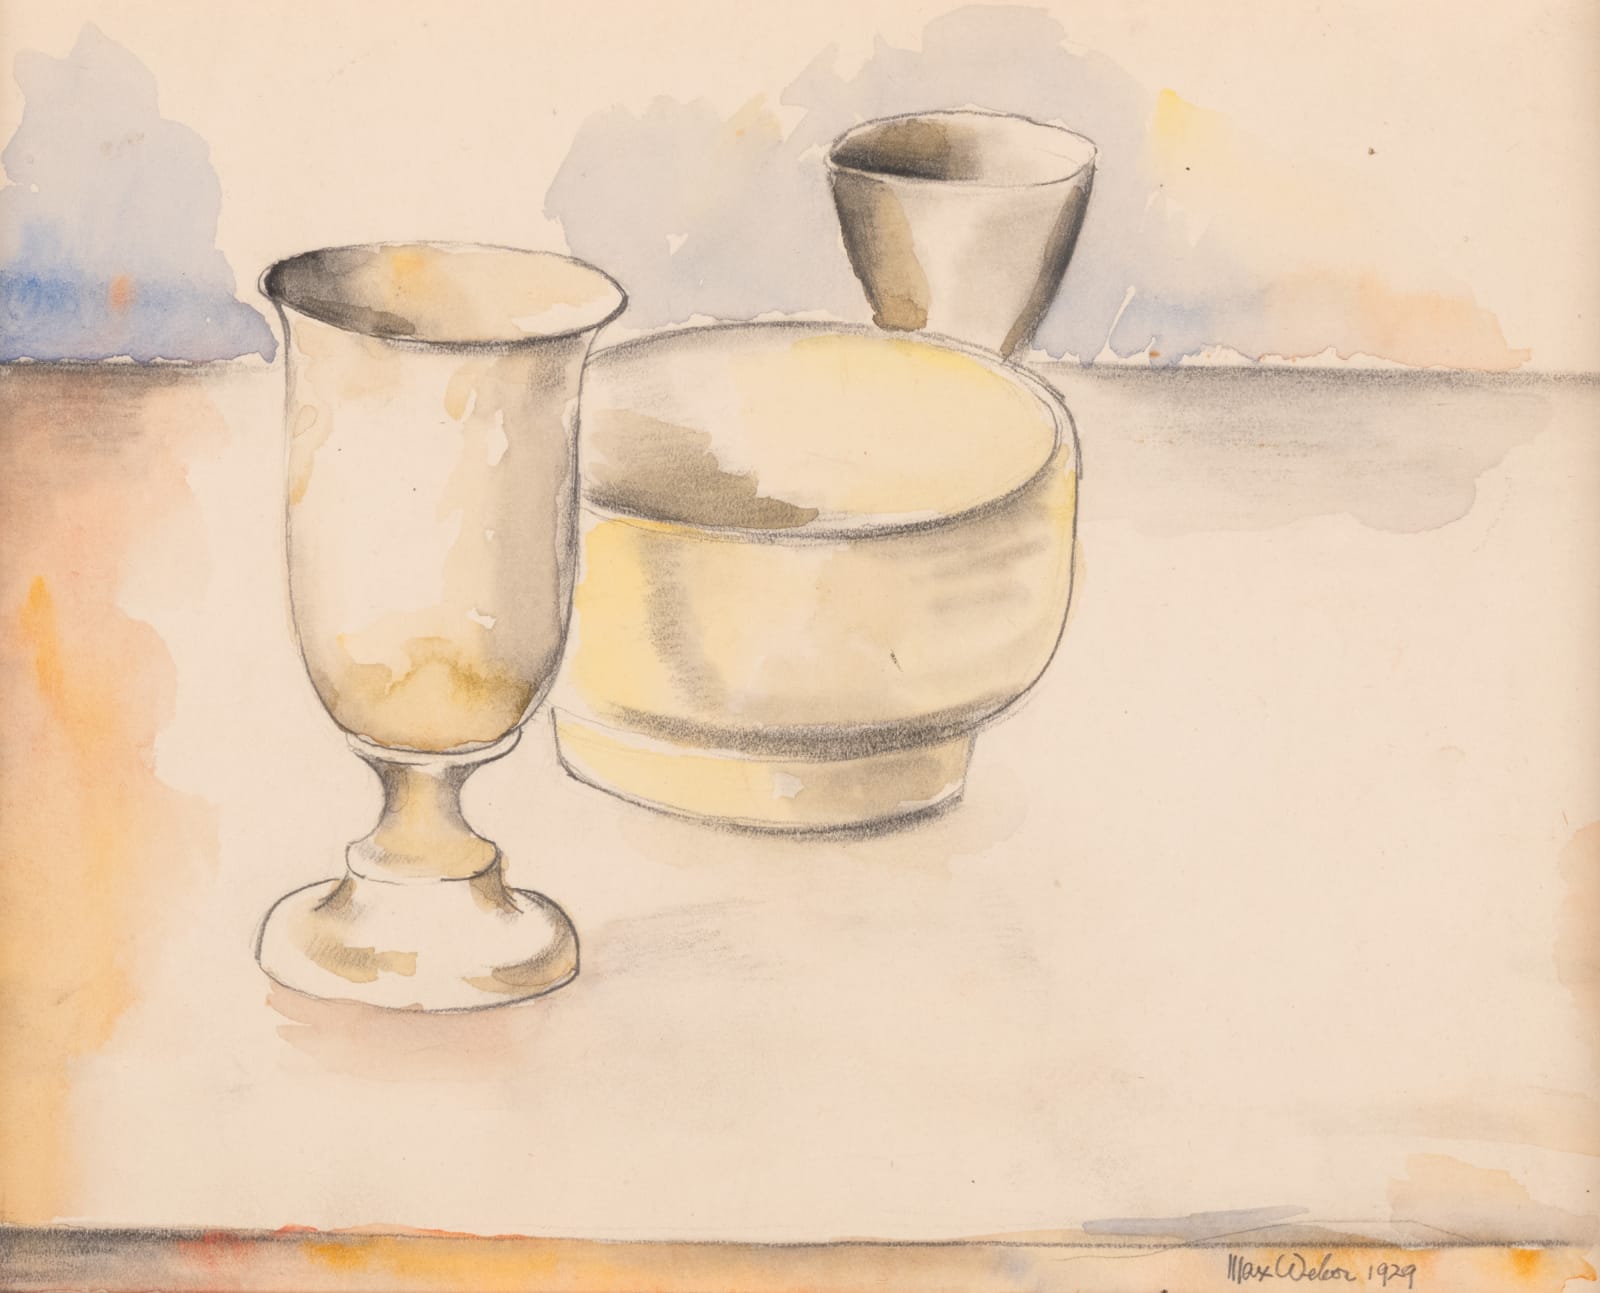 Max Weber, Pewter Cup, 1929